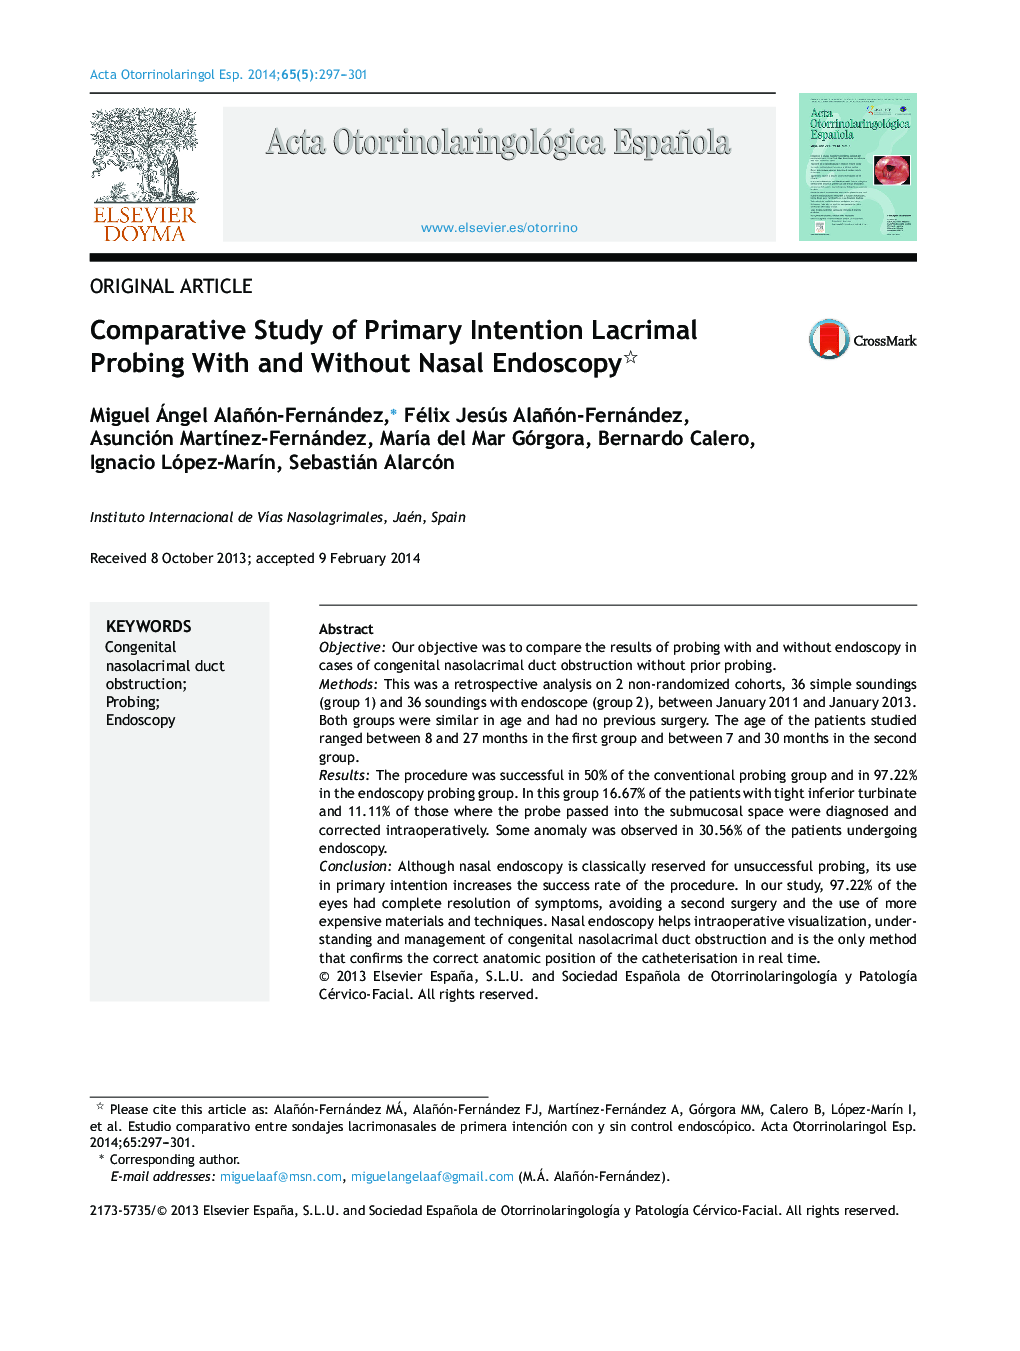 Comparative Study of Primary Intention Lacrimal Probing With and Without Nasal Endoscopy 